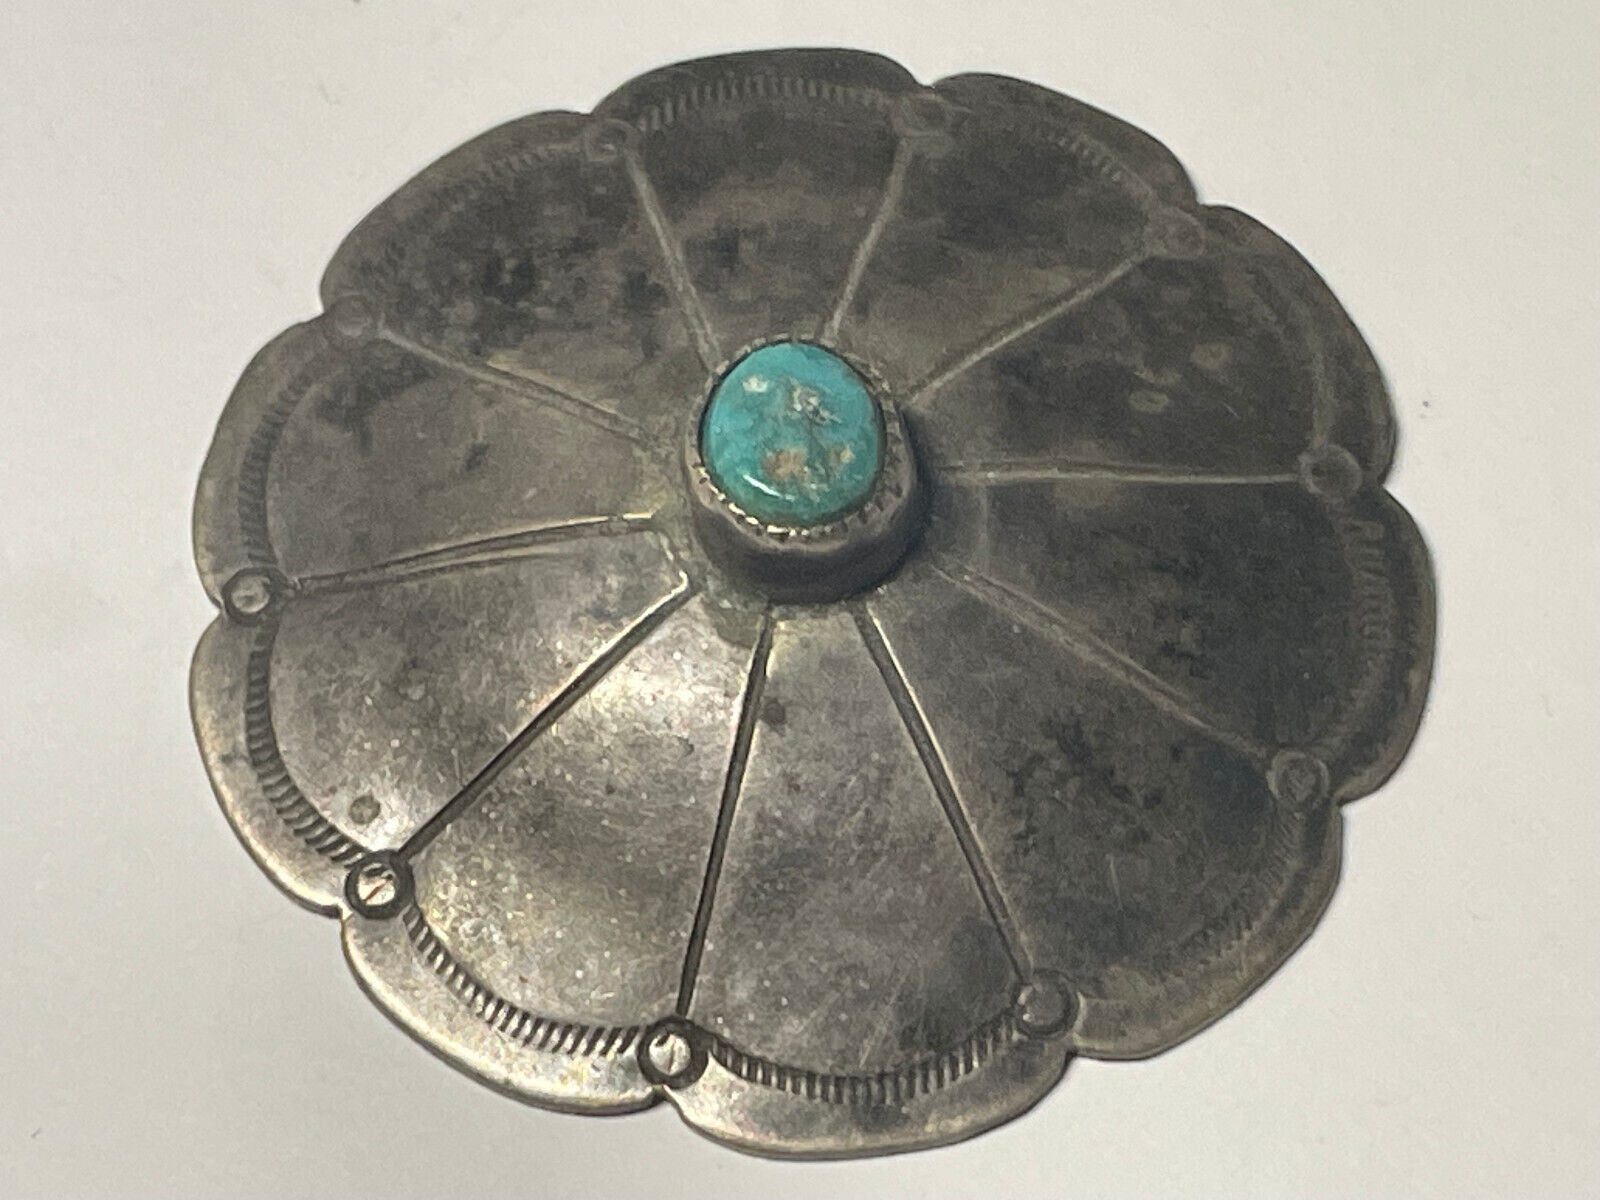 1920s-1930s Large Navajo Silver Mocassin Button with Turquoise in Sawtooth Bezel